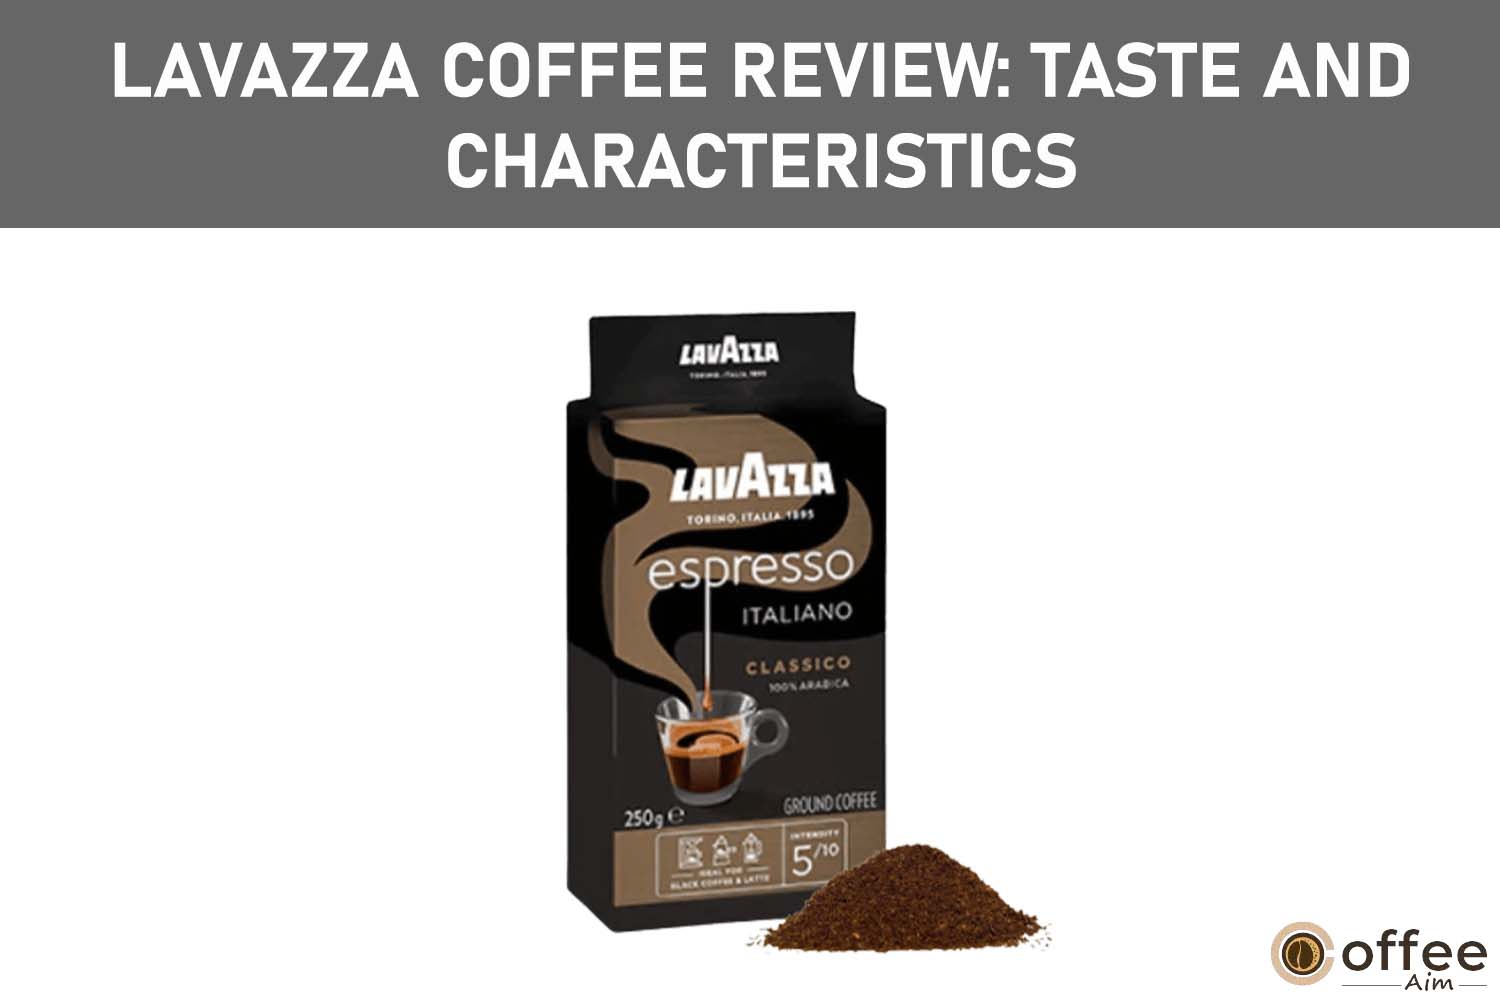 Featured image for the article "Lavazza Coffee Review: Taste and Characteristics"